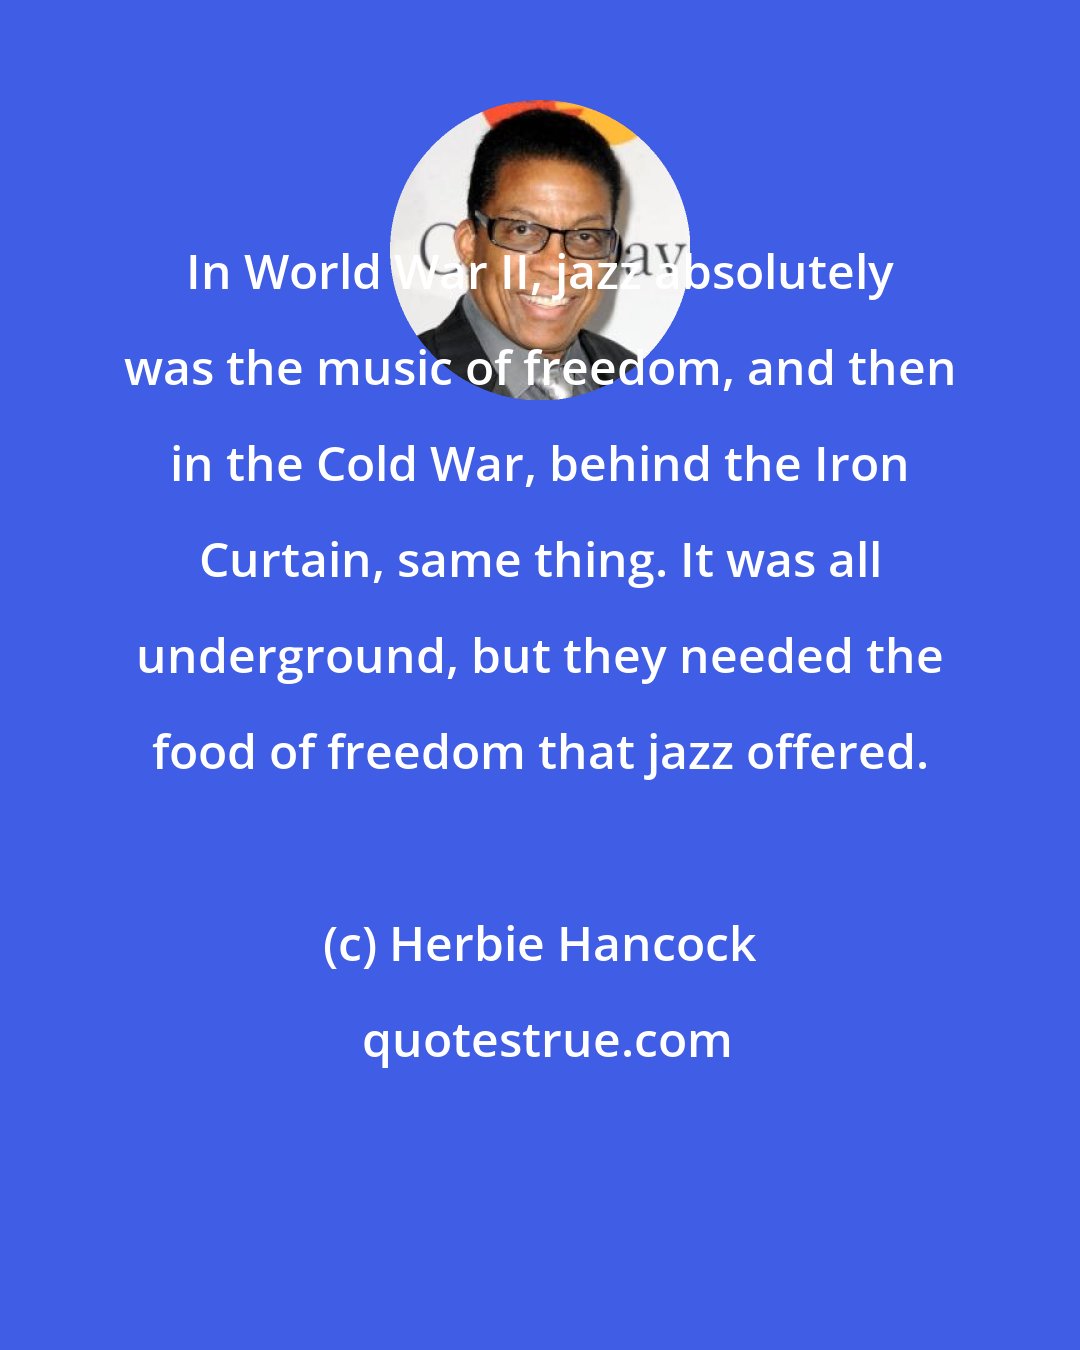 Herbie Hancock: In World War II, jazz absolutely was the music of freedom, and then in the Cold War, behind the Iron Curtain, same thing. It was all underground, but they needed the food of freedom that jazz offered.